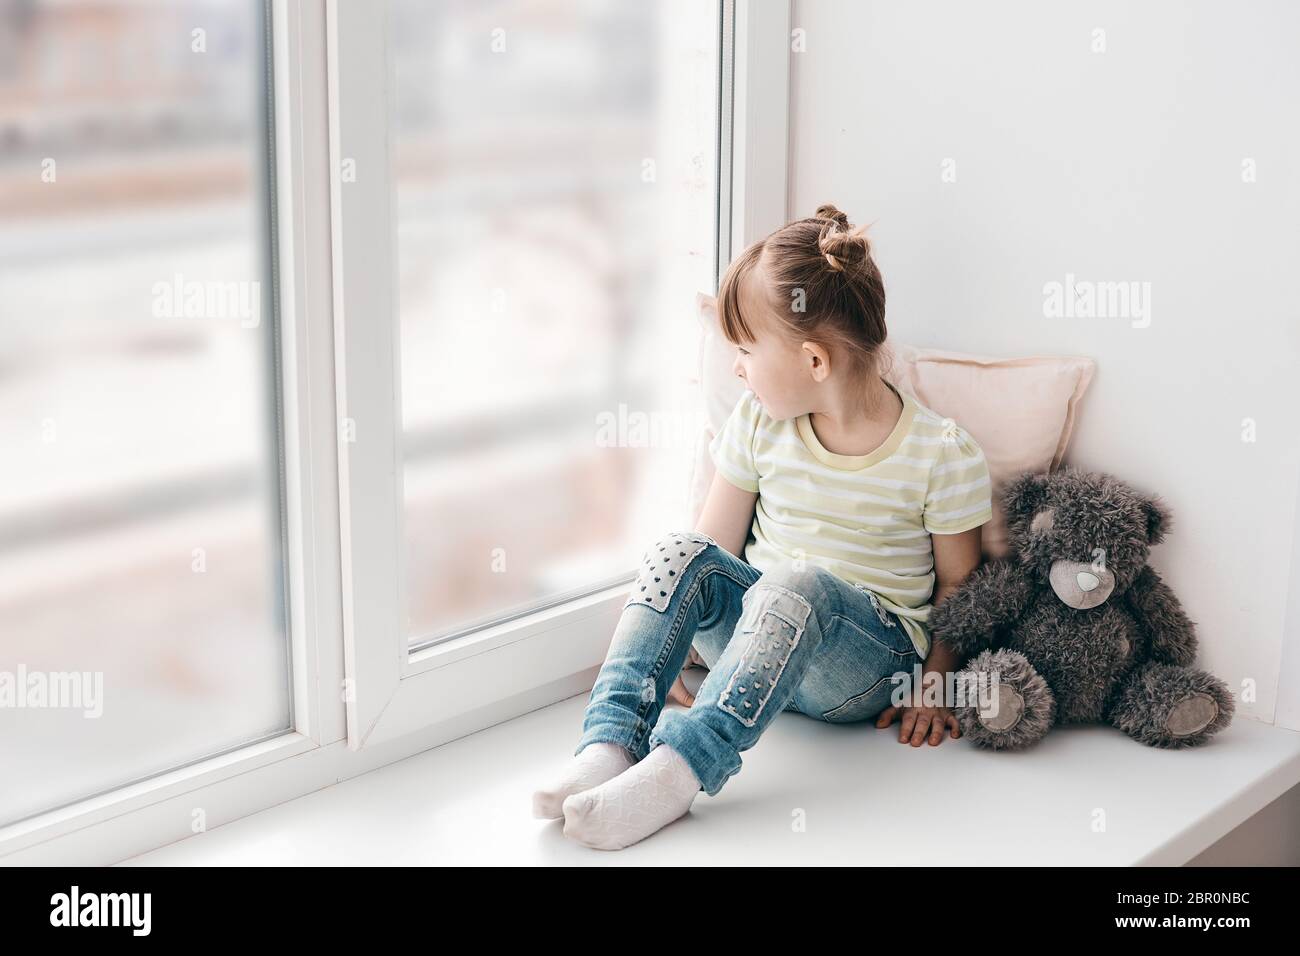 A little girl sits on a window sill and looks out the window into the street. It's a sad mood. Illness or self-isolation. Stock Photo